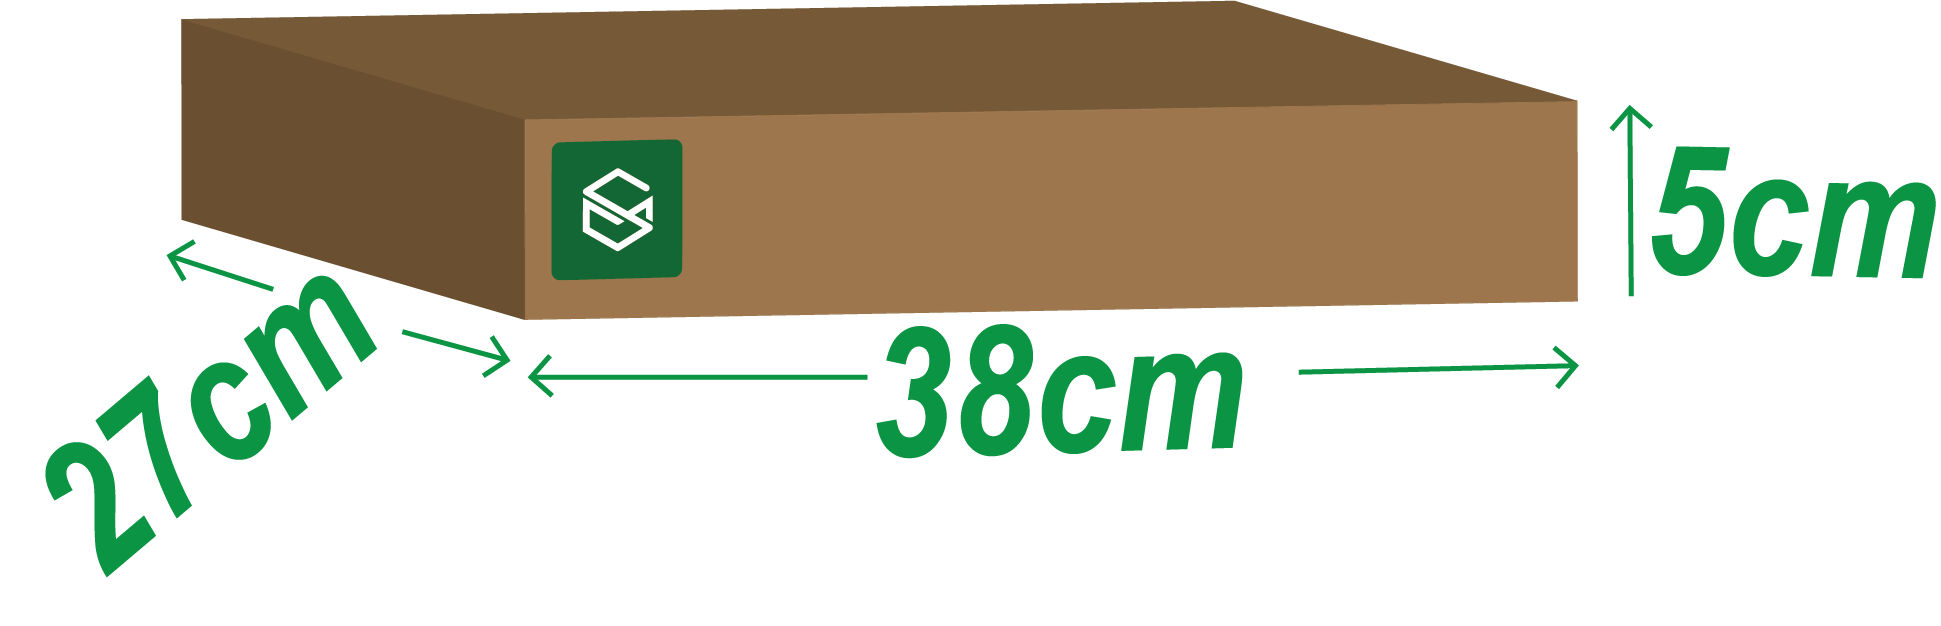 Package up to 1 kg, dimensions up to 56x30x17 cm, price €3.99, not selected